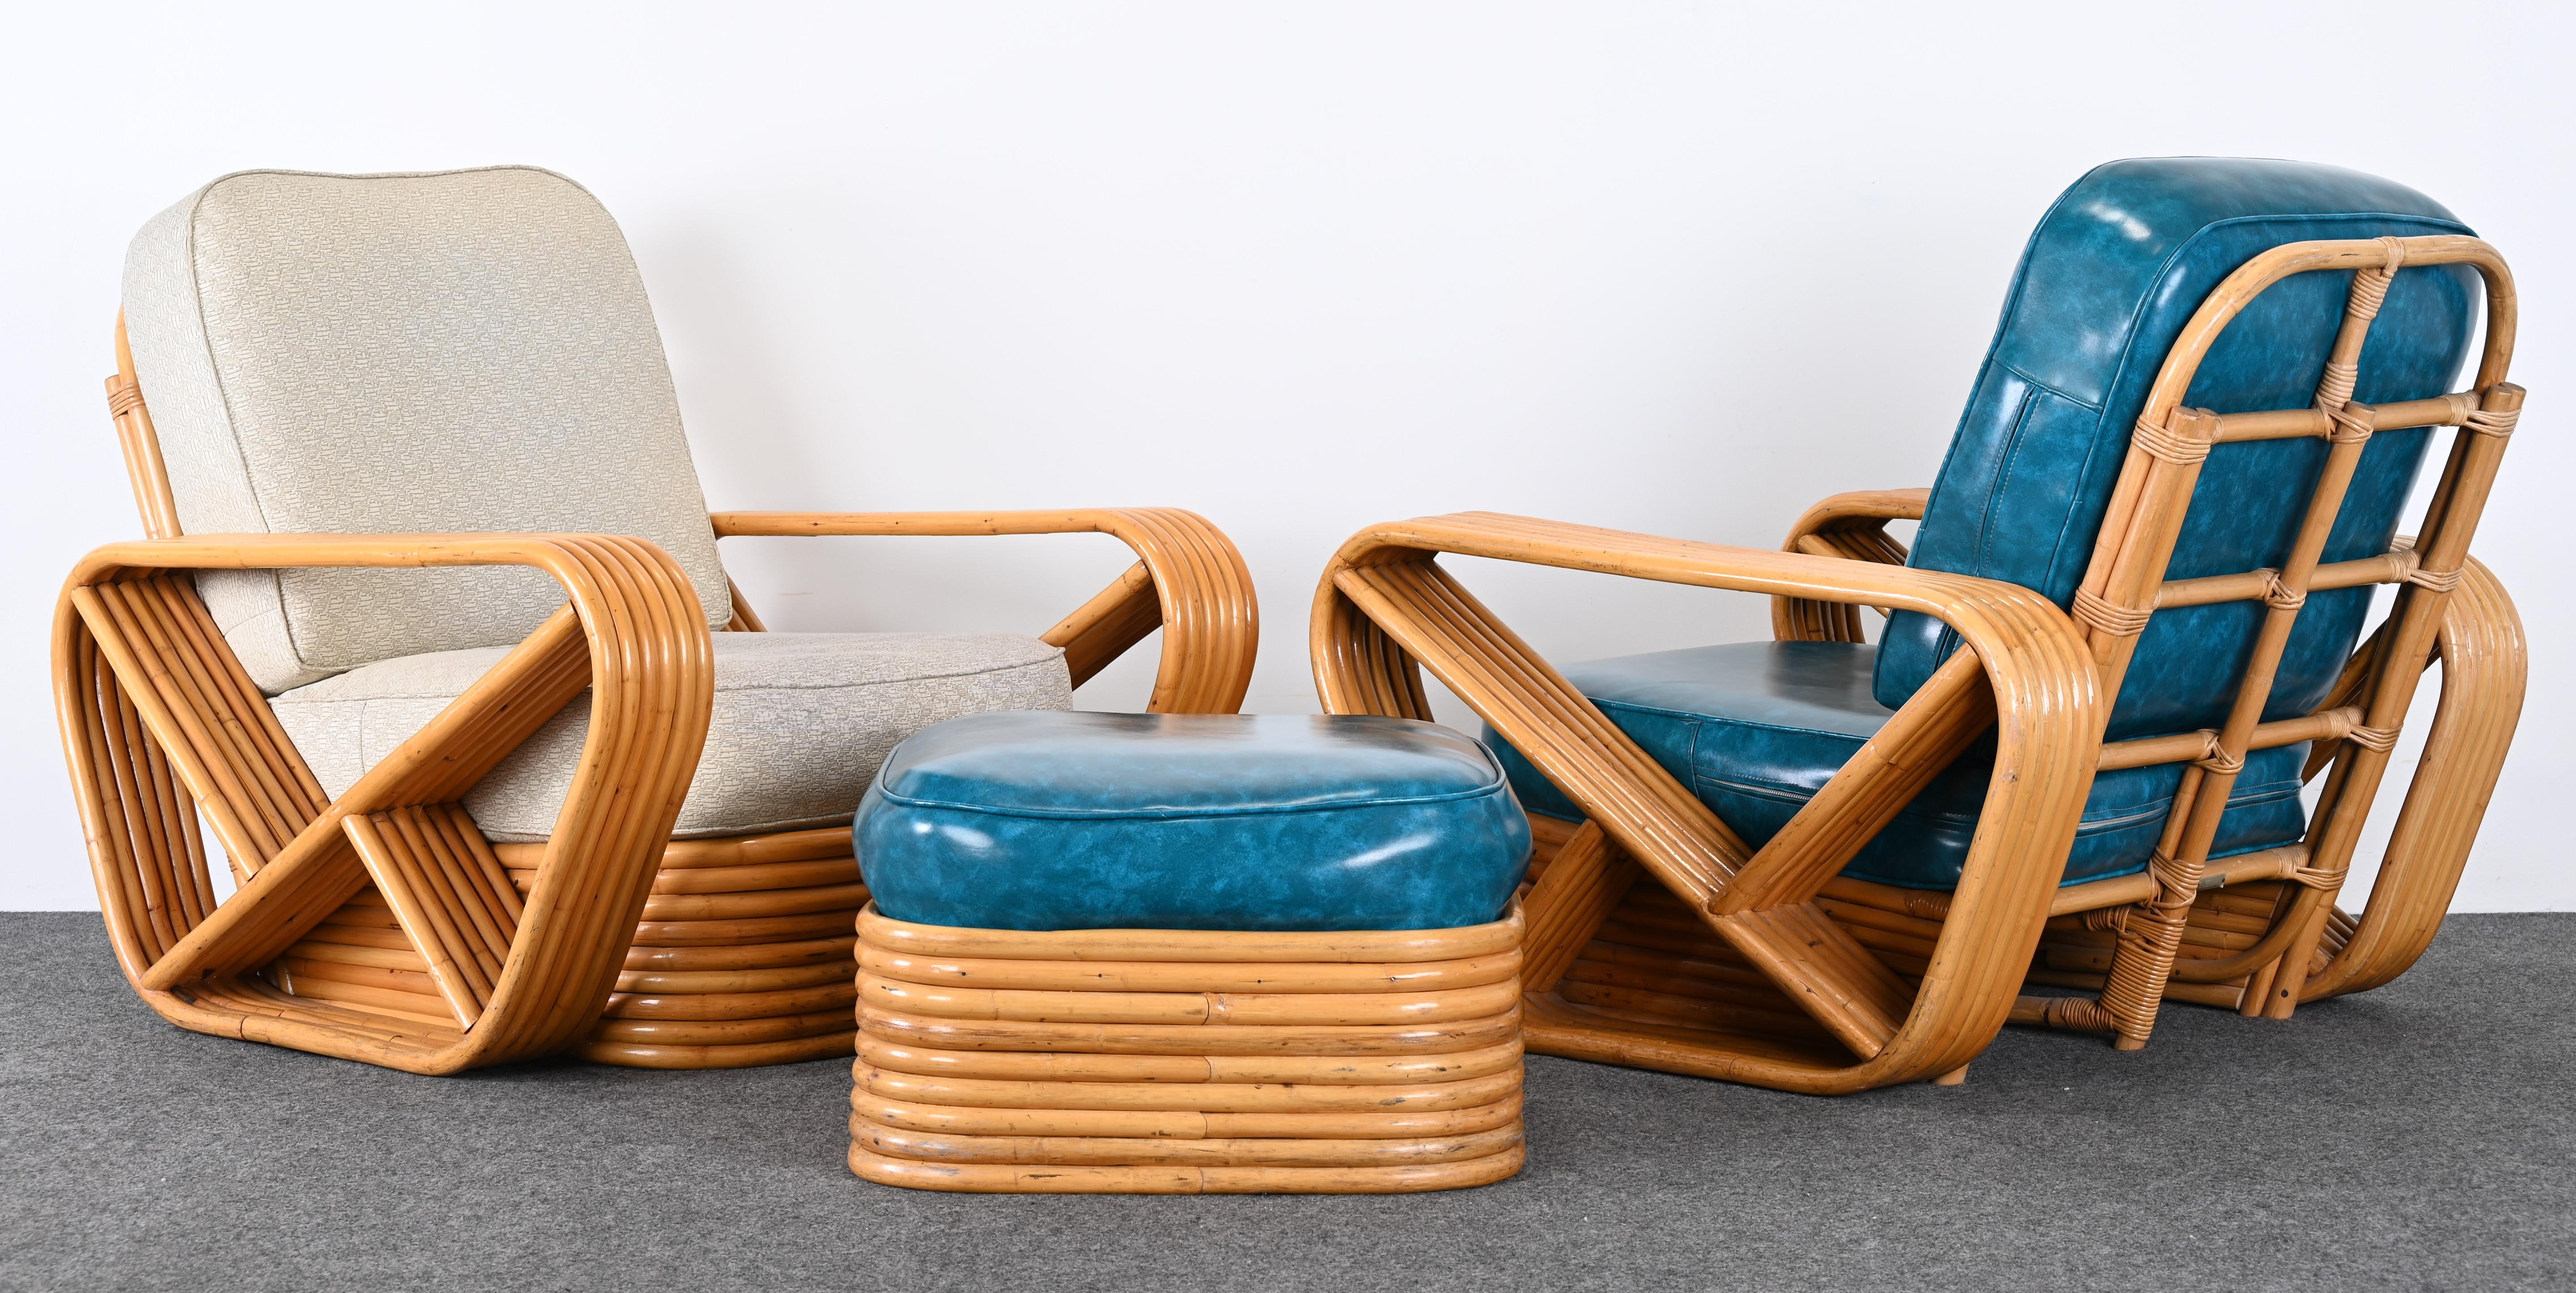 An Organic Modern rattan set containing a pair of armchairs and an ottoman. This set would make a strong focal point in any room. This pair of armchairs and ottoman would look great in a Mid-Century Modern, Transitional, or Traditional interior.